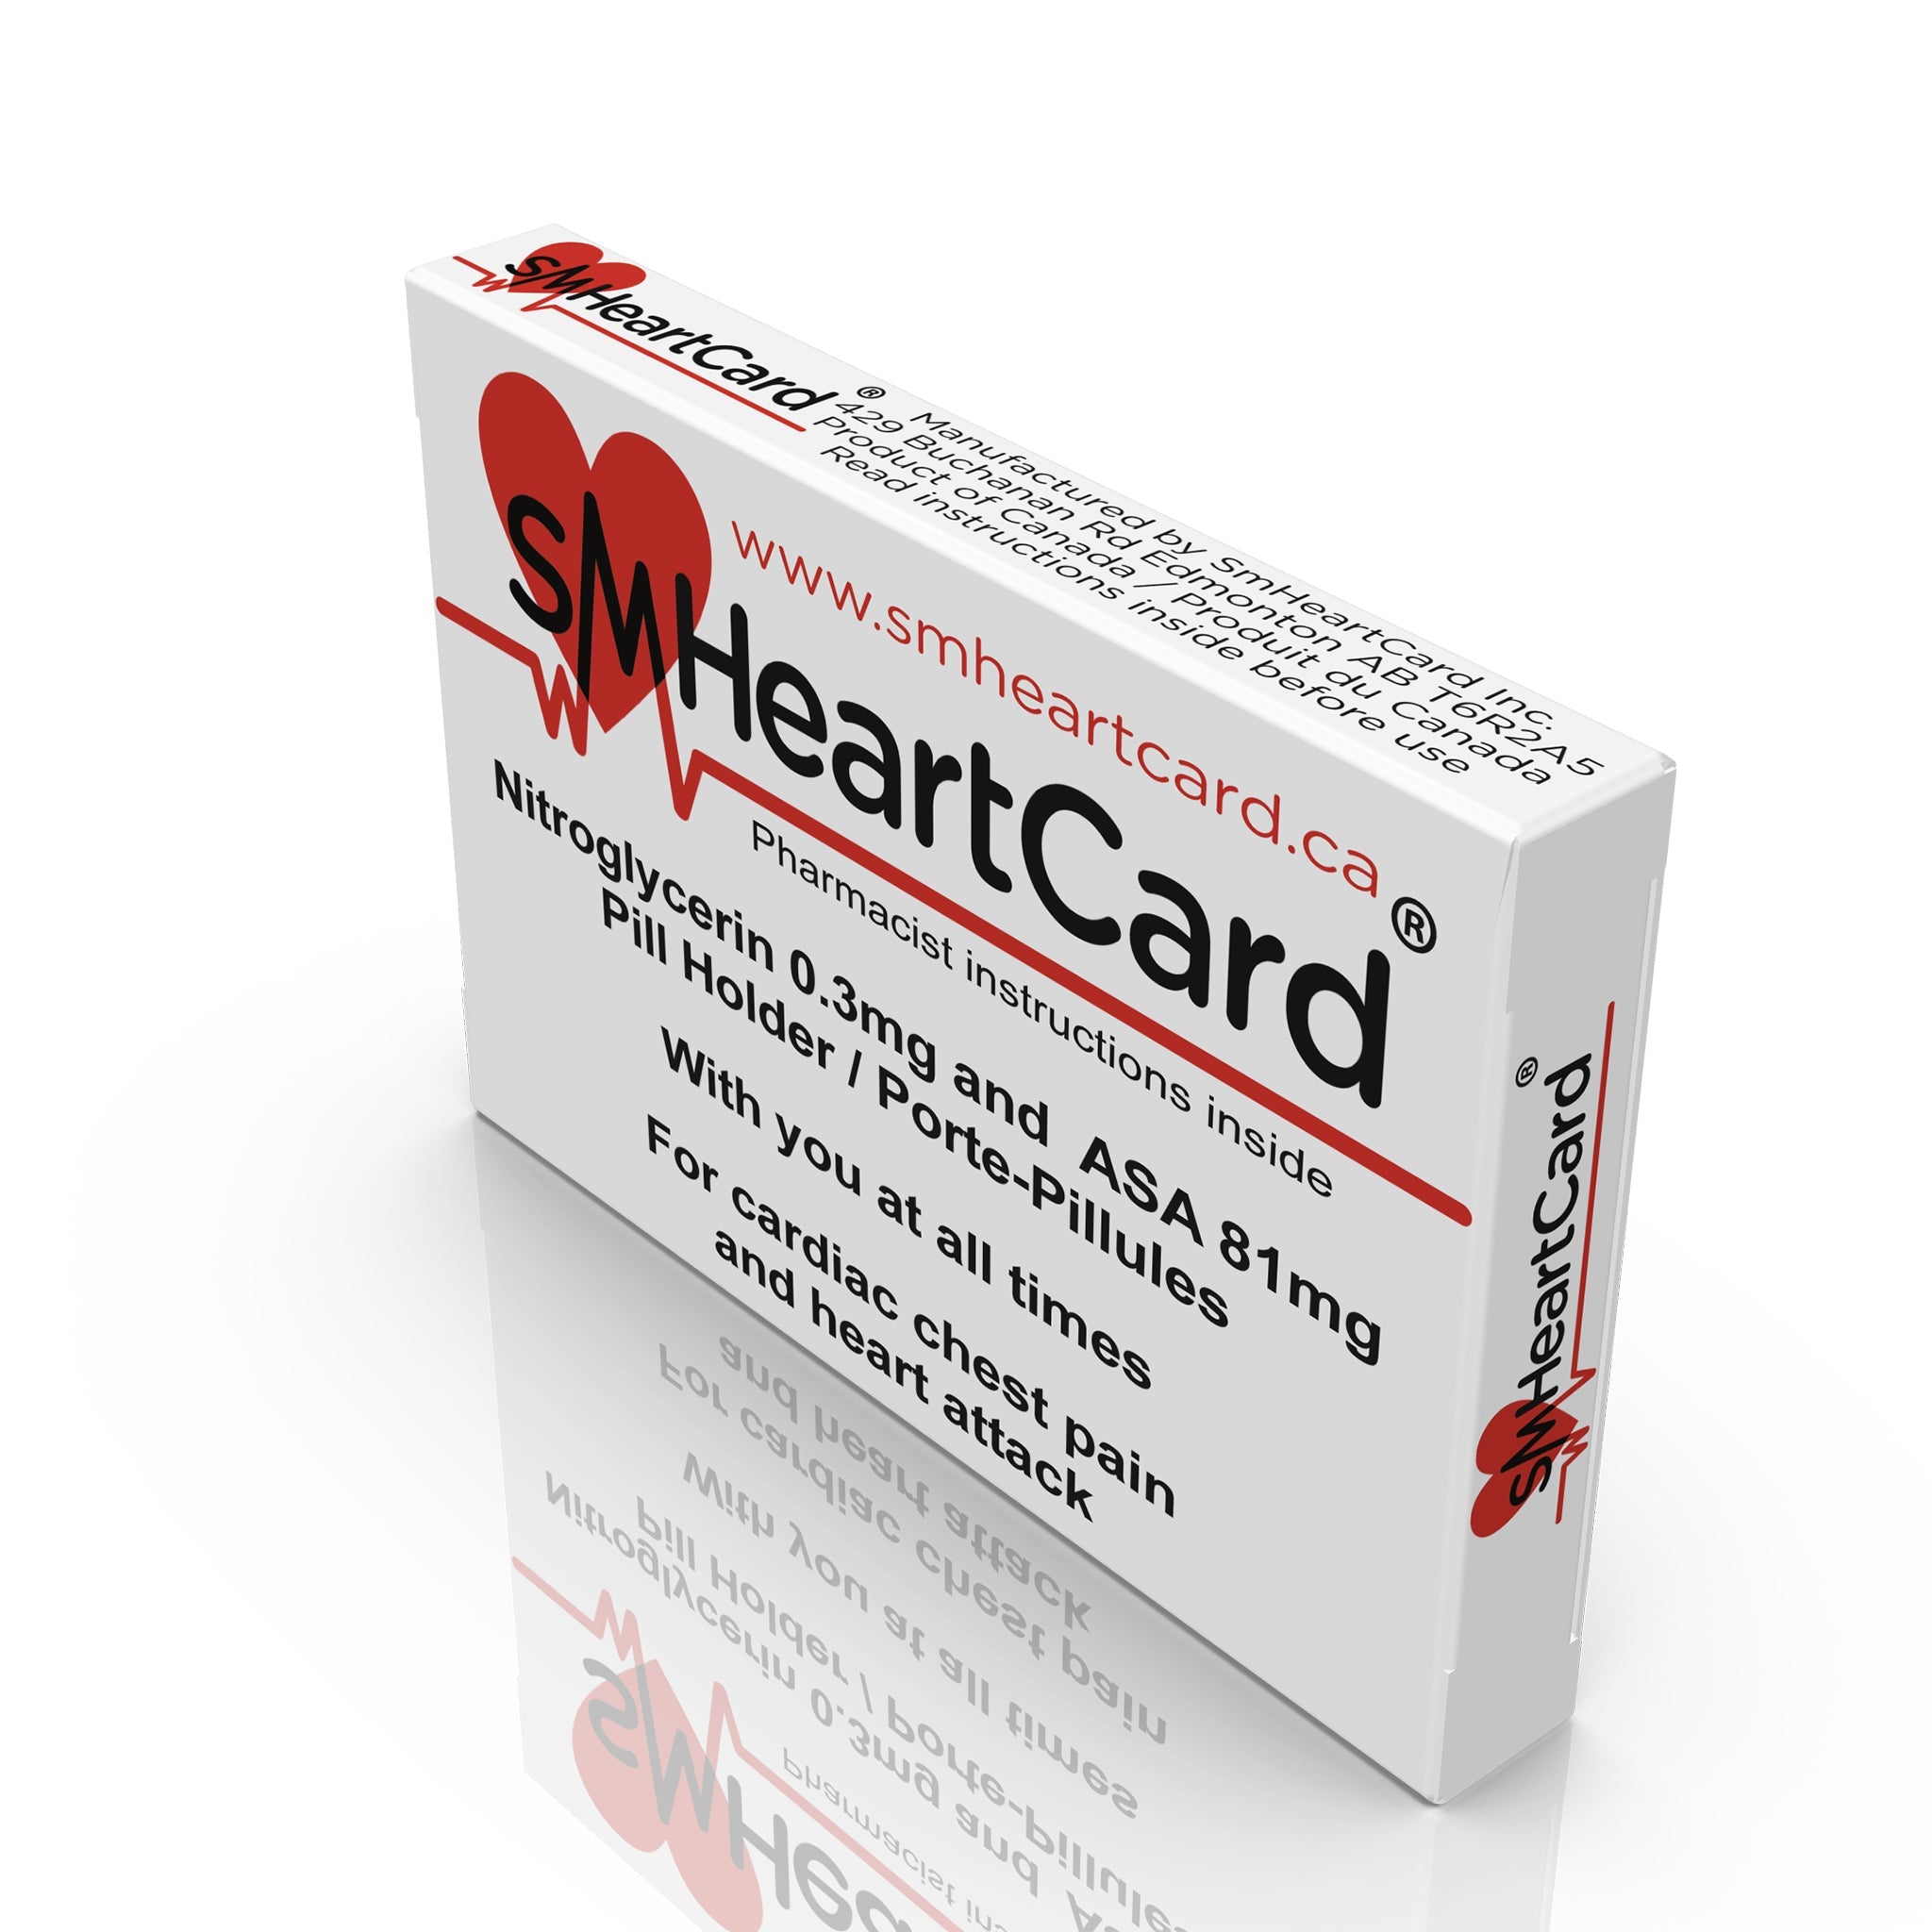 SMHeartCard Loaded - ships to you with Nitroglycerin and ASA pills inside